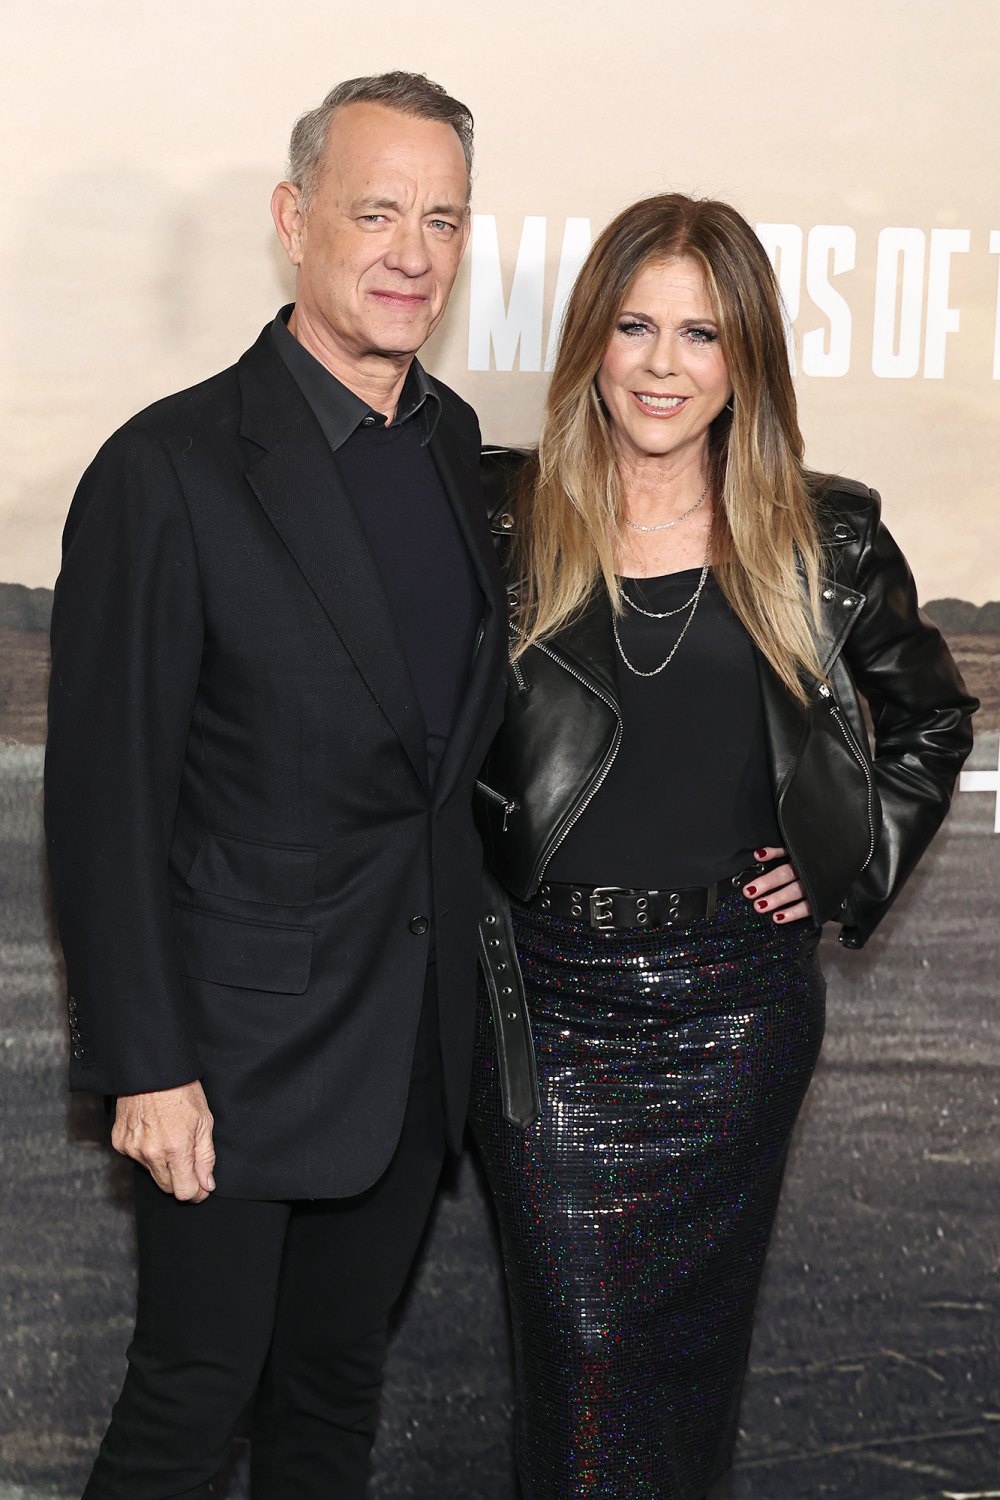 Tom Hanks and Rita Wilson Have 'Fun' Family Night With Sons Chet and Truman on Red Carpet